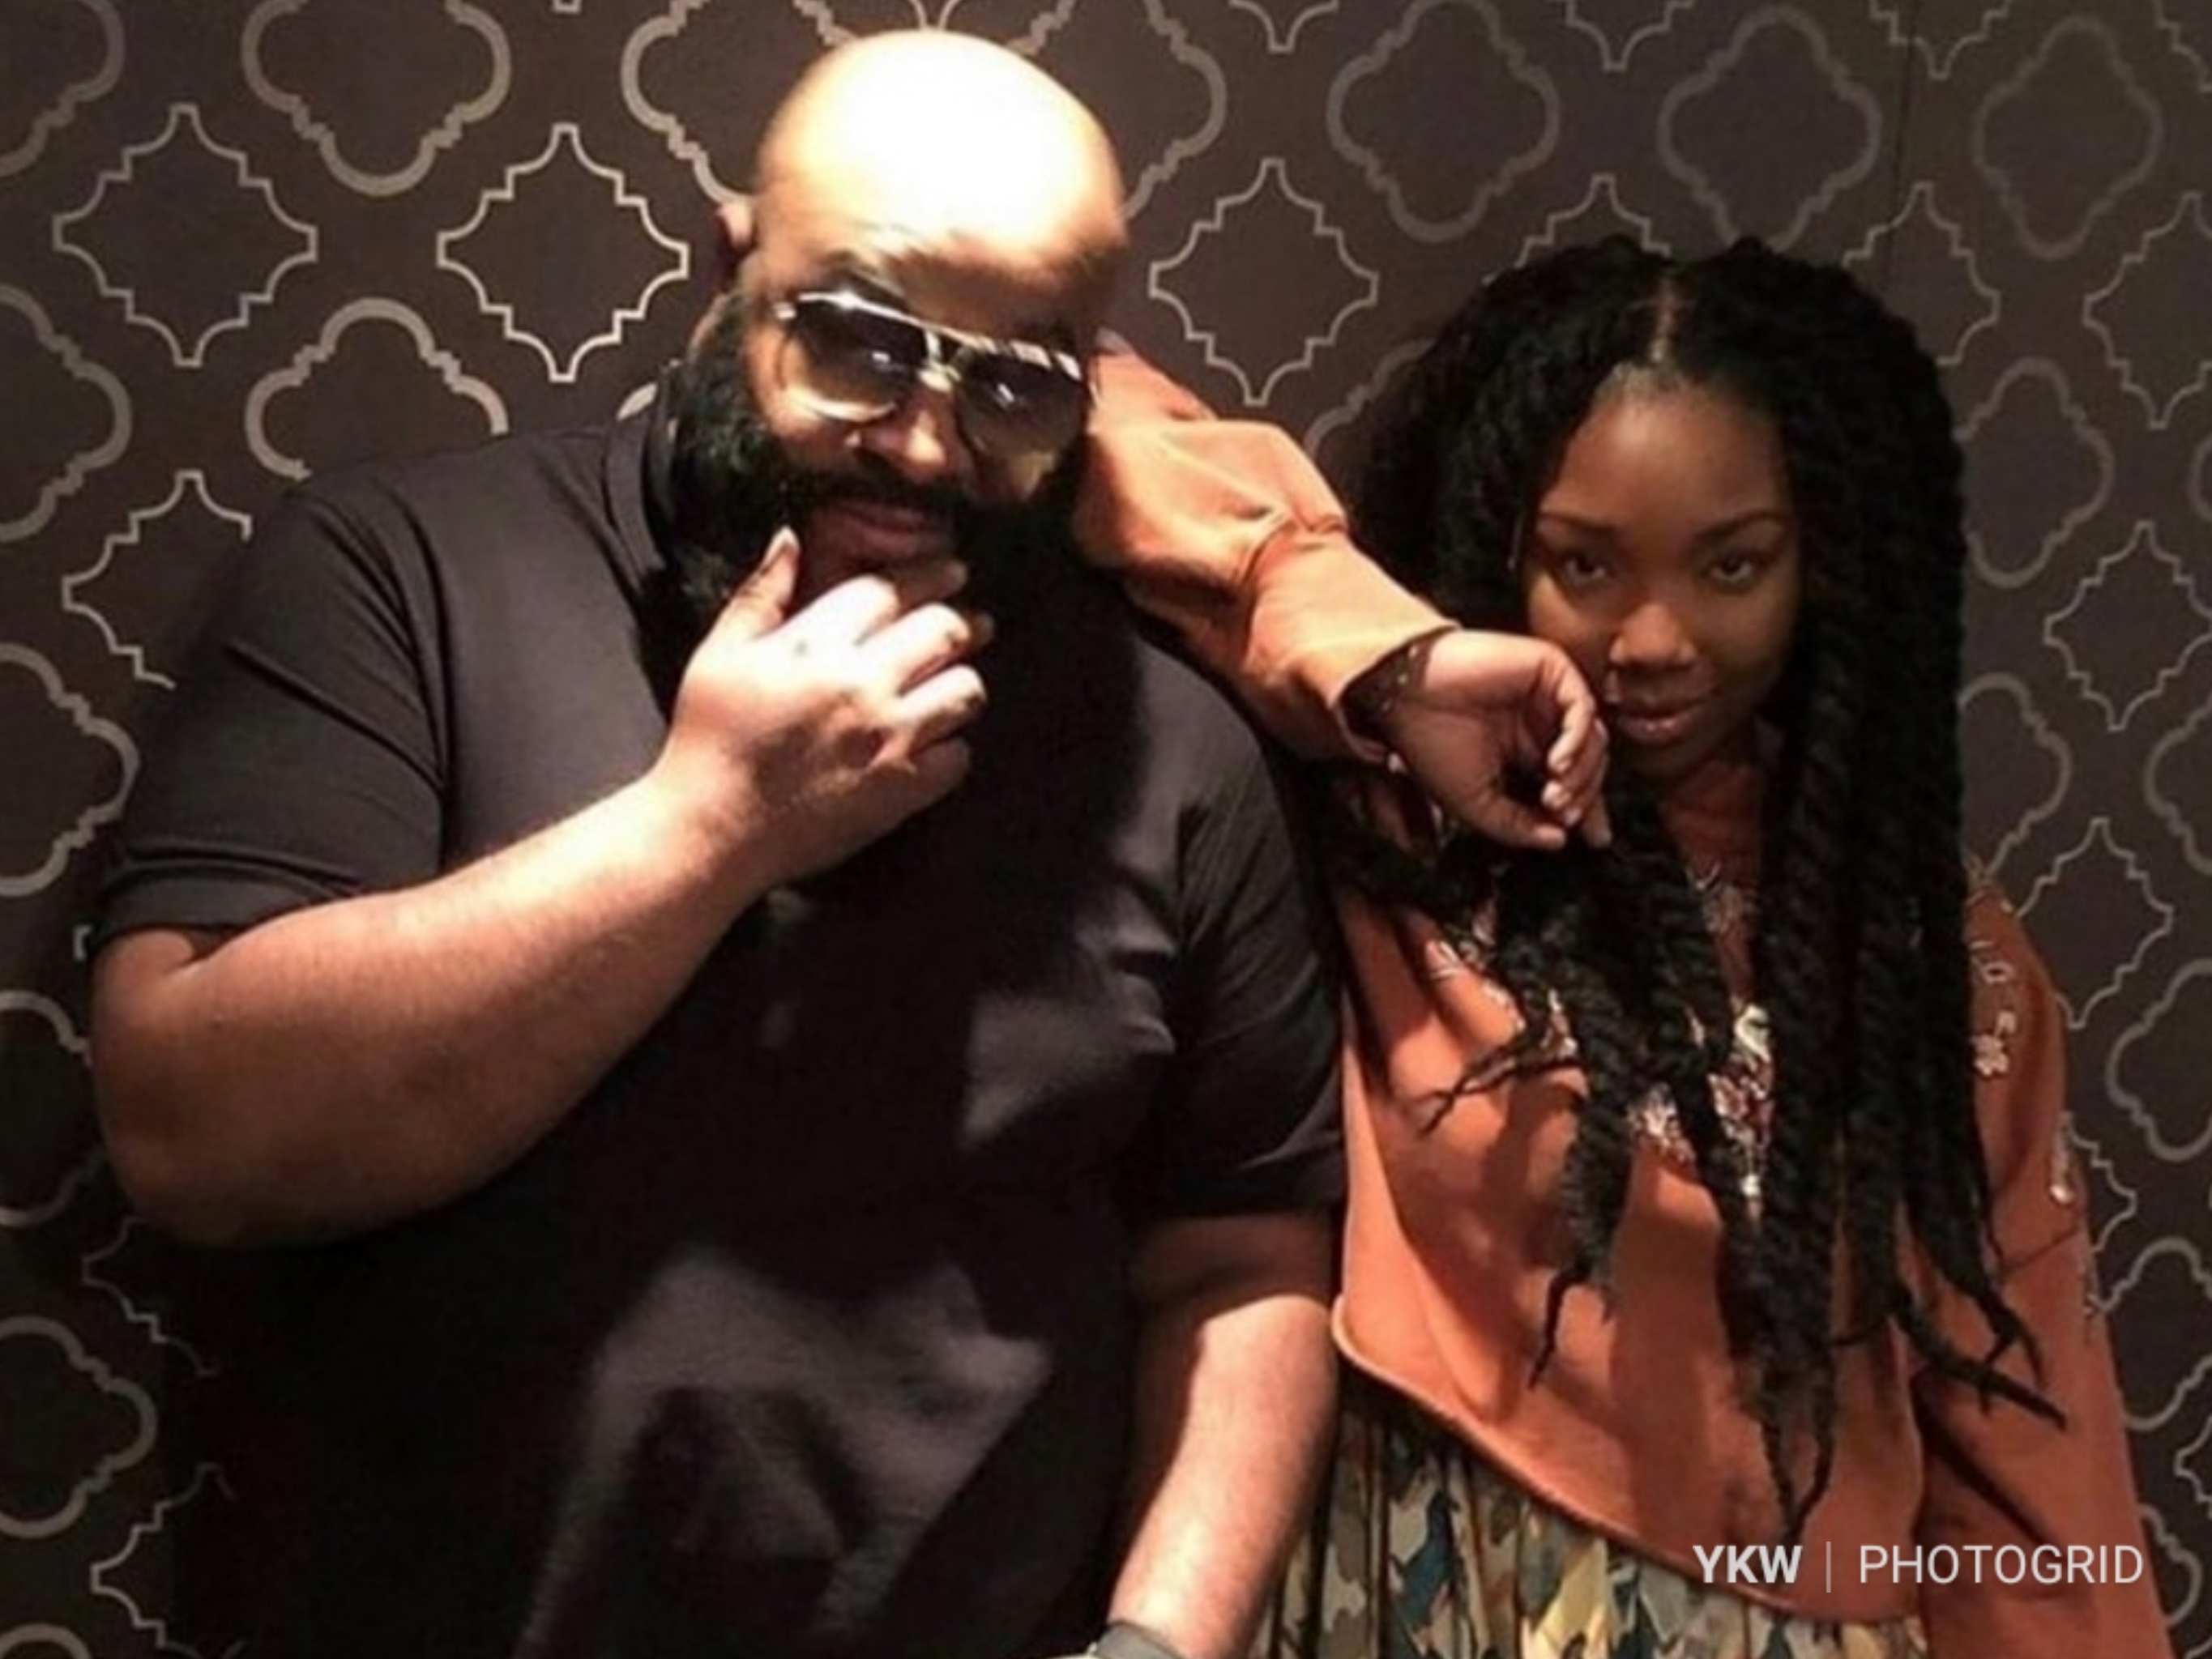 Brandy Pays Tribute To Big Shiz With Video Footage Of Them Working On Projects Together